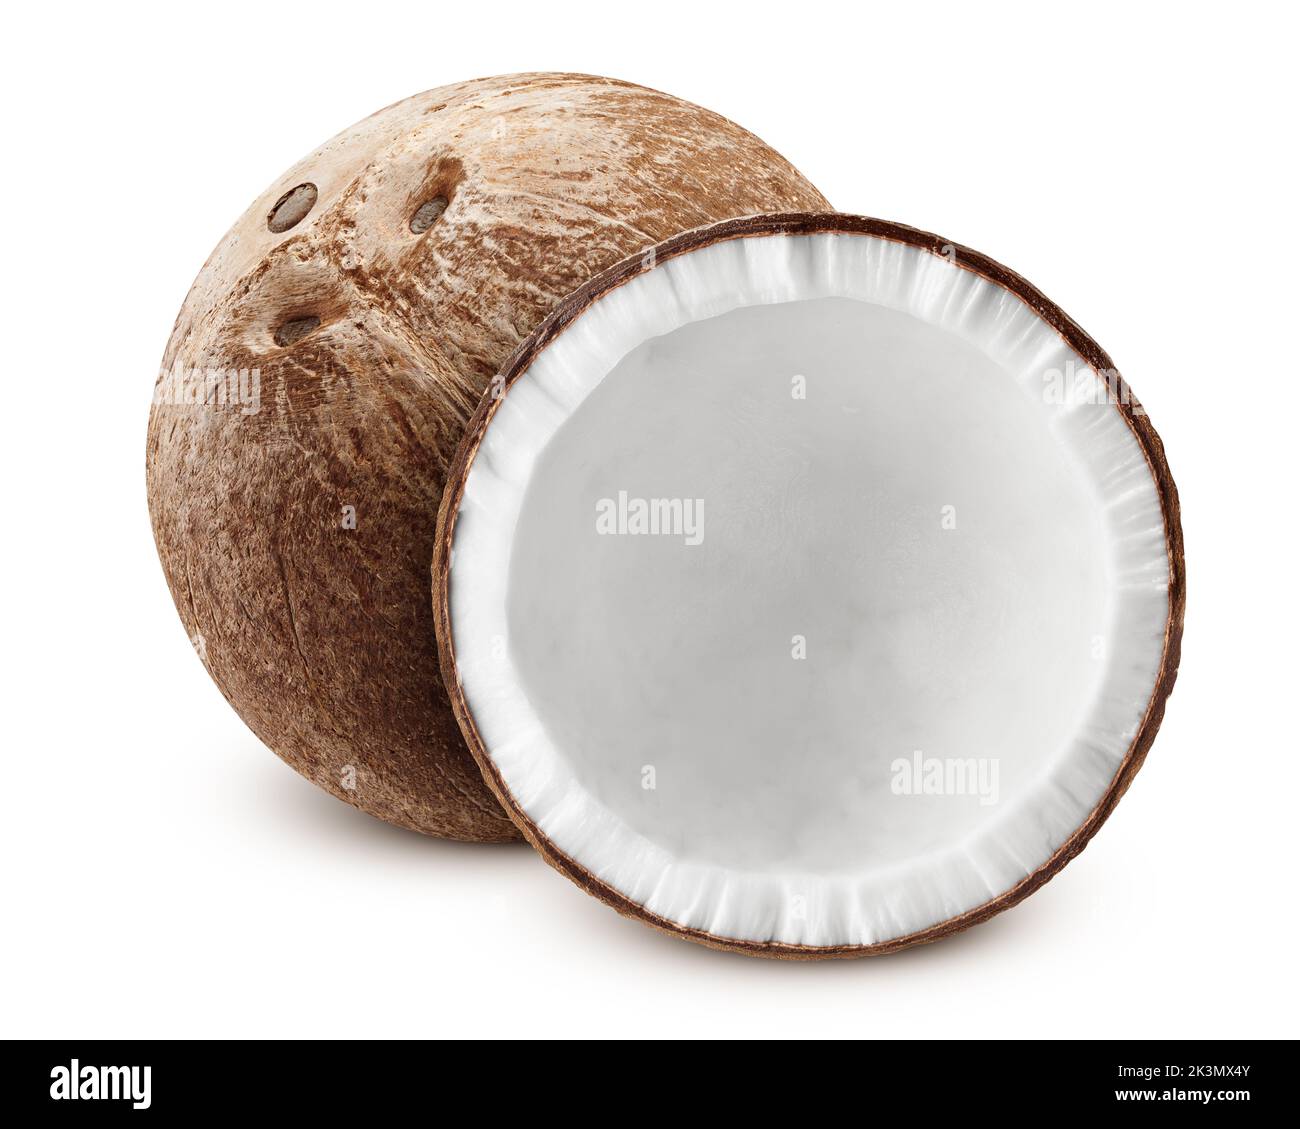 coconut, isolated on white background, full depth of field Stock Photo